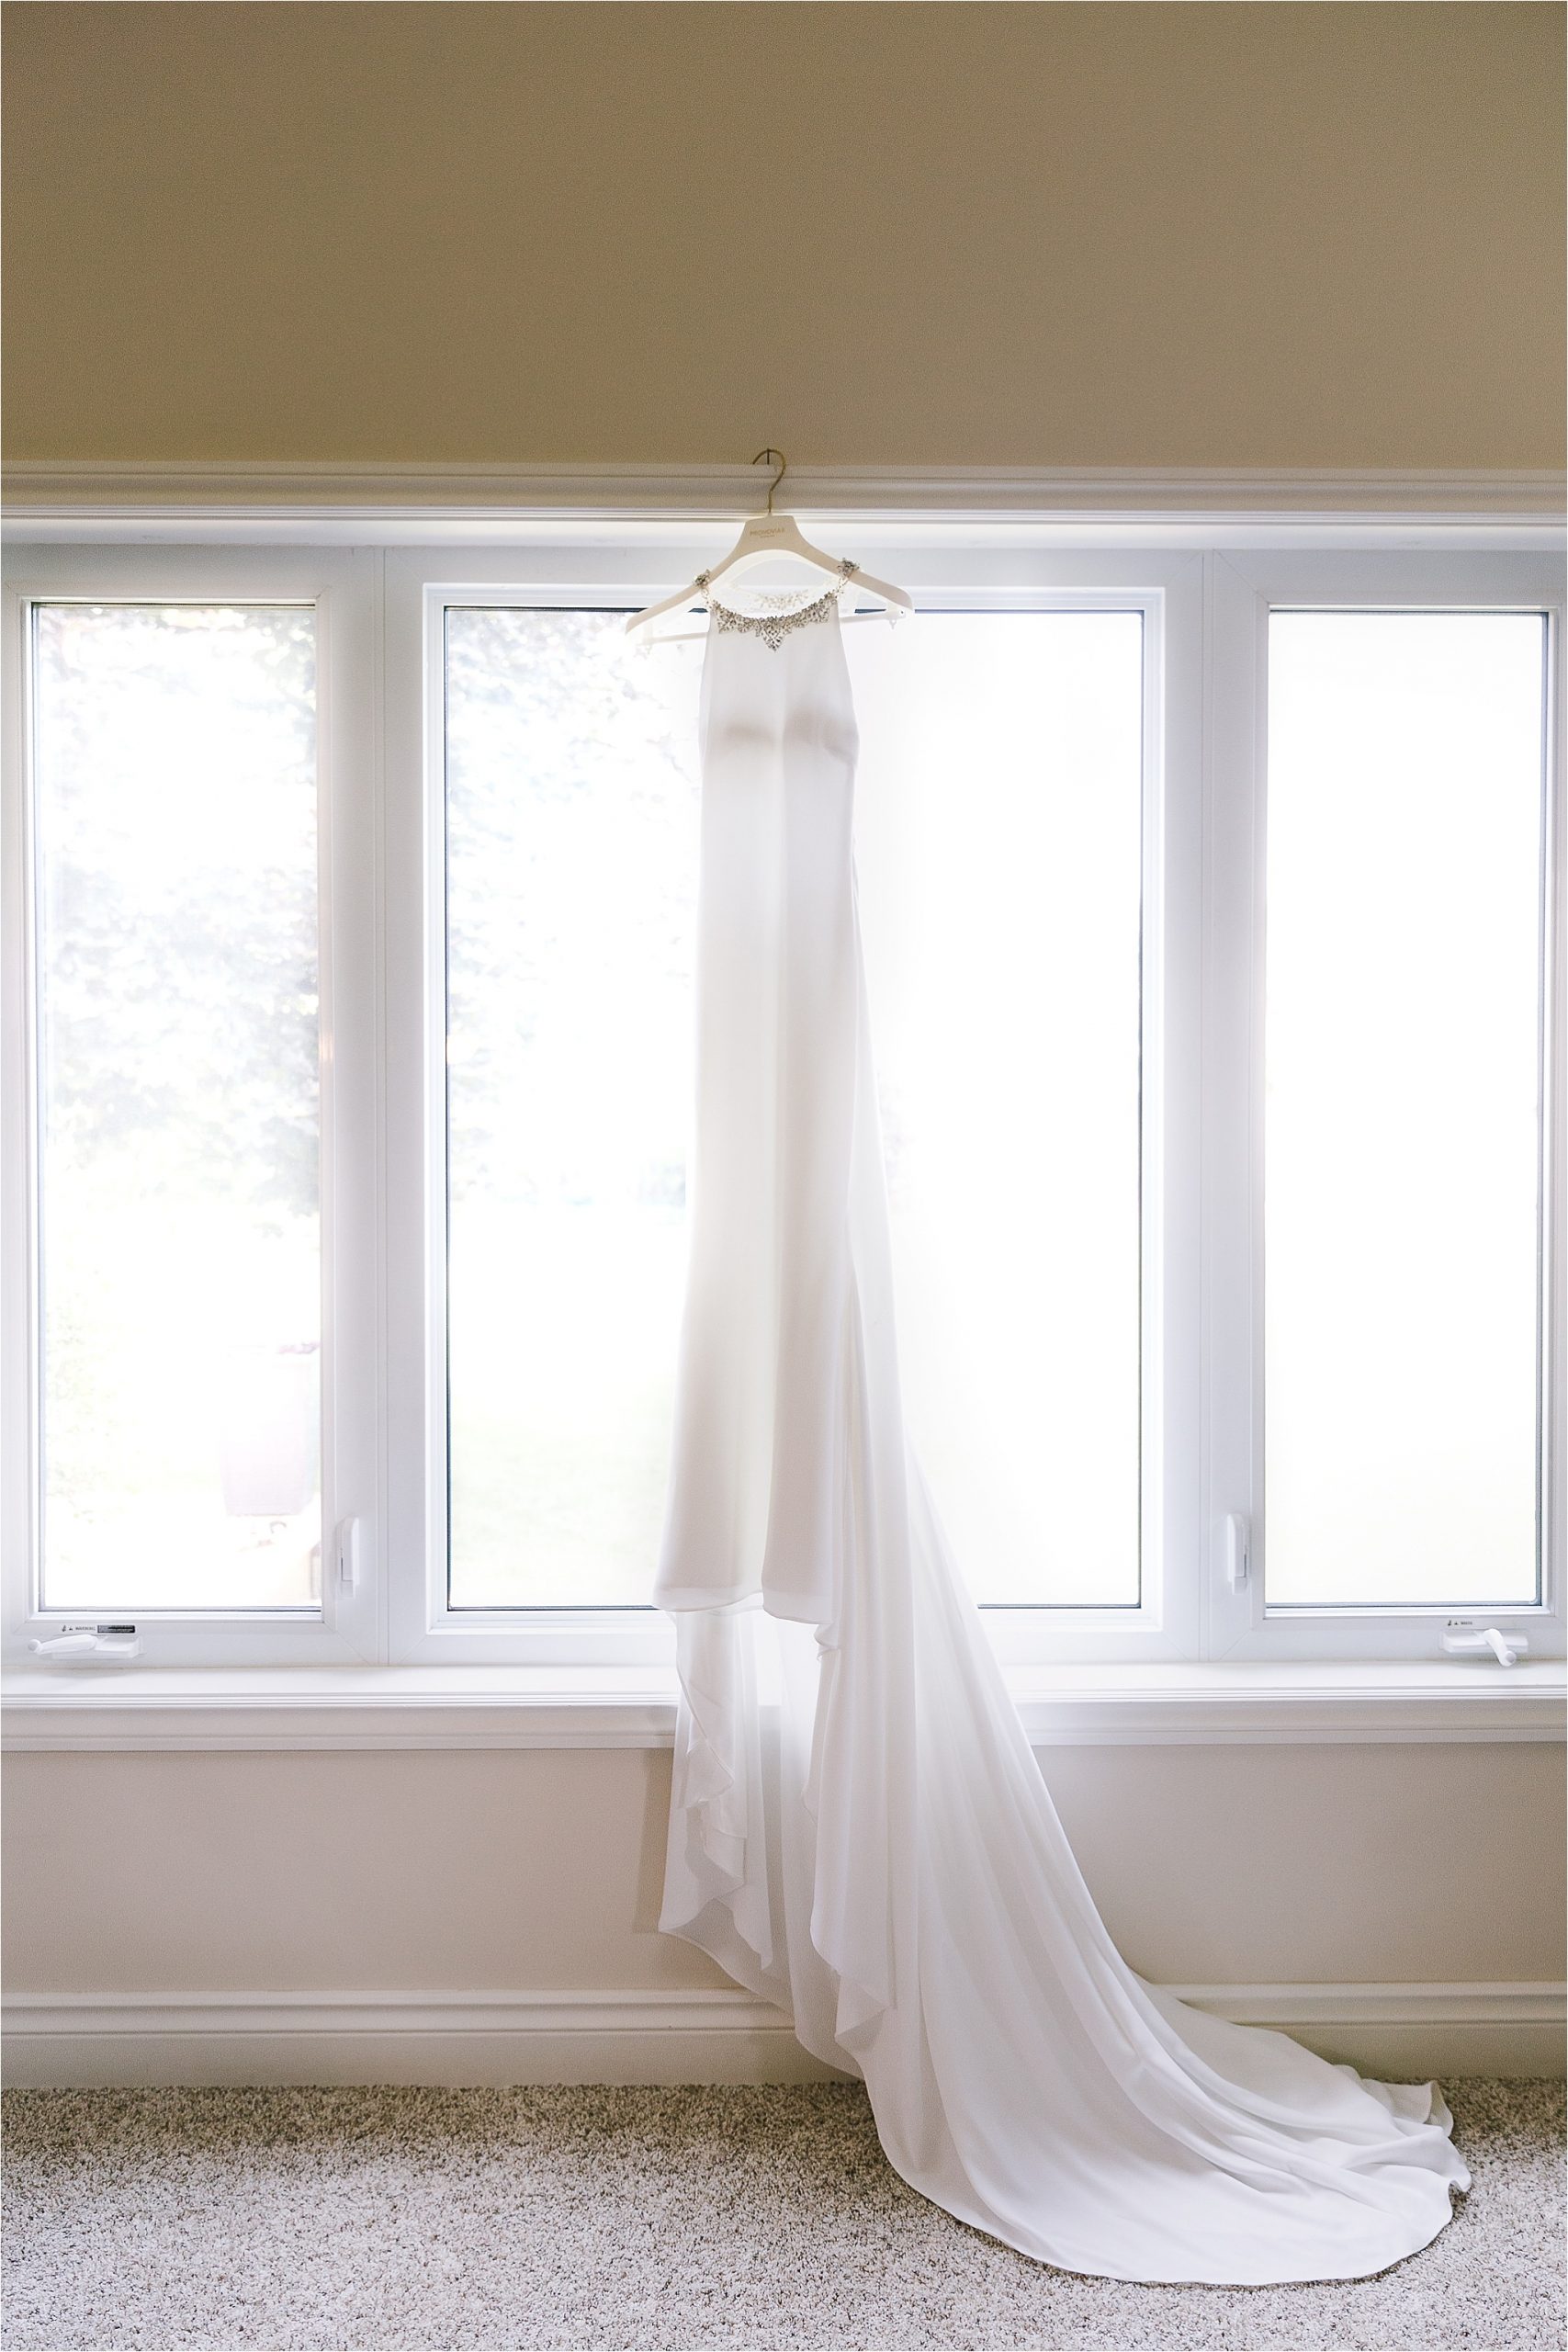 Bridal gown wedding dress from Provonias hanging in front of window